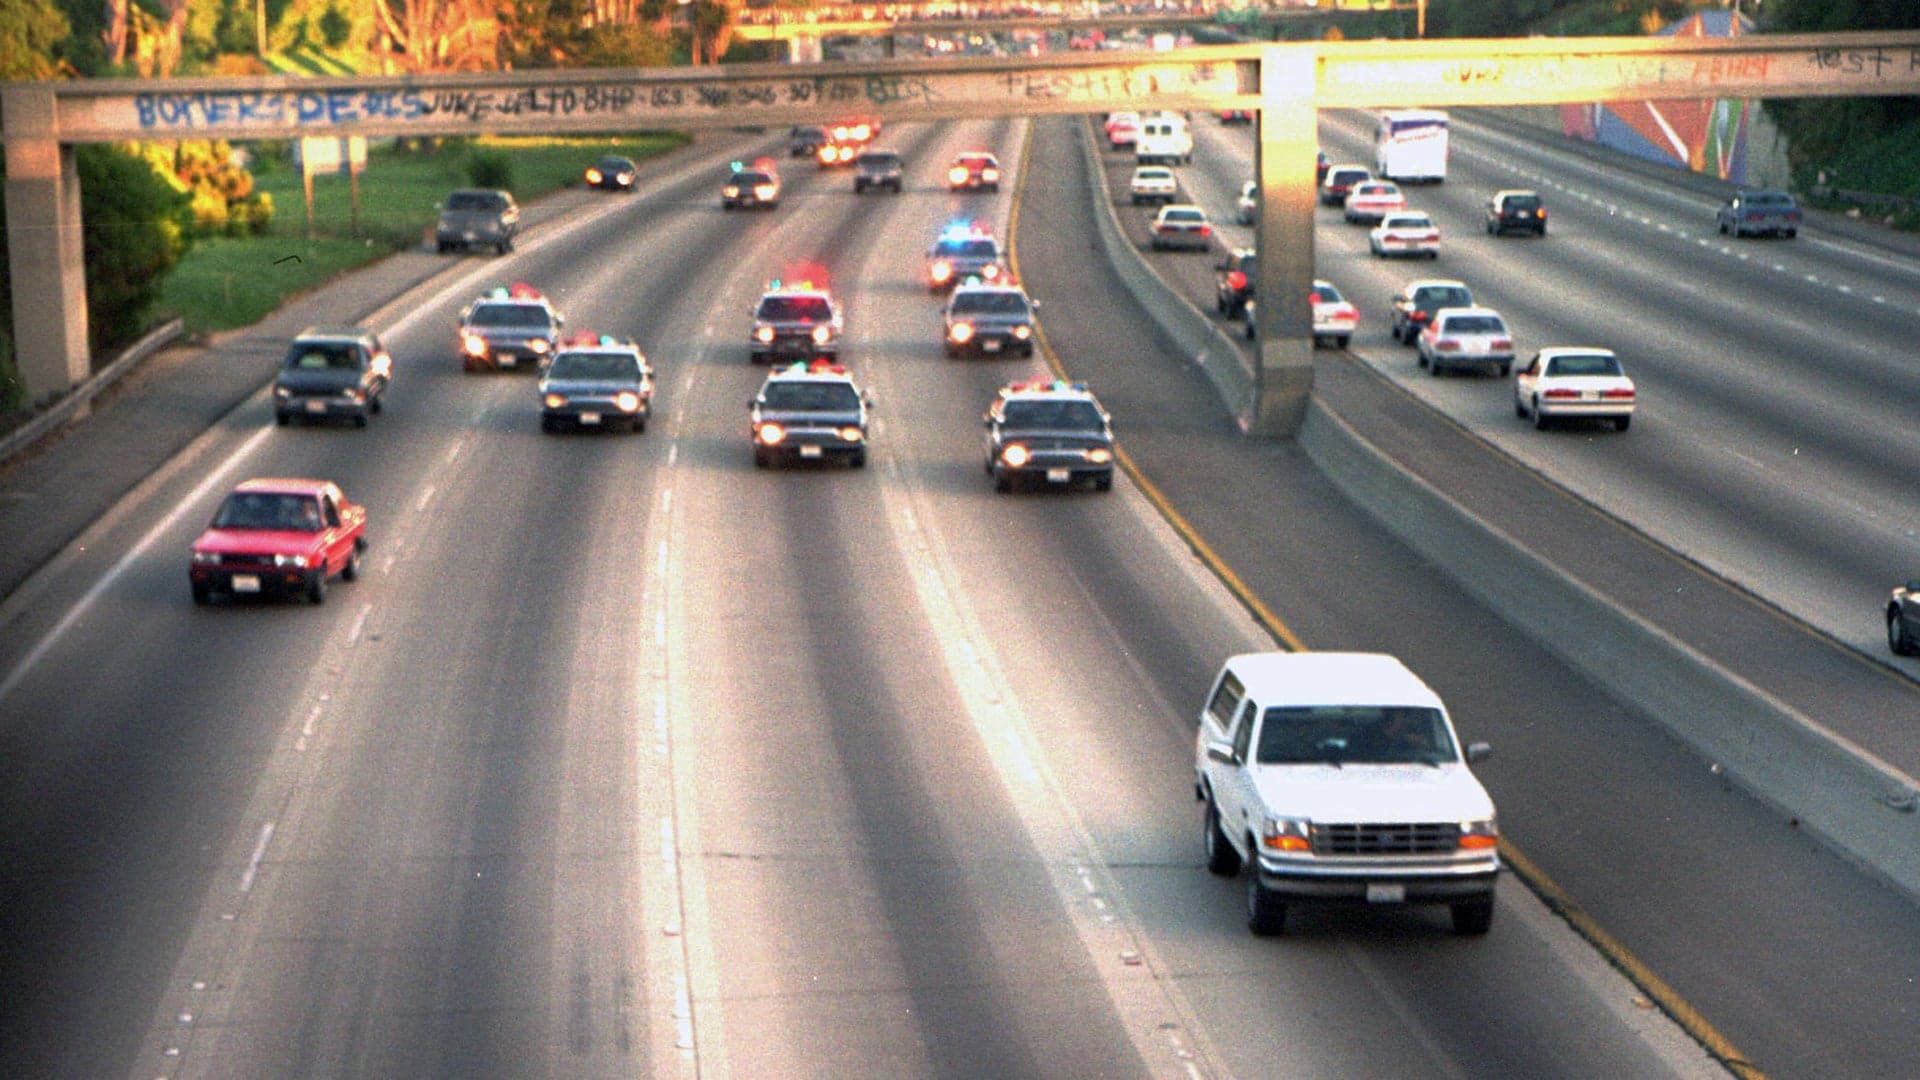 These Police Chases Put O.J. Simpson’s to Shame